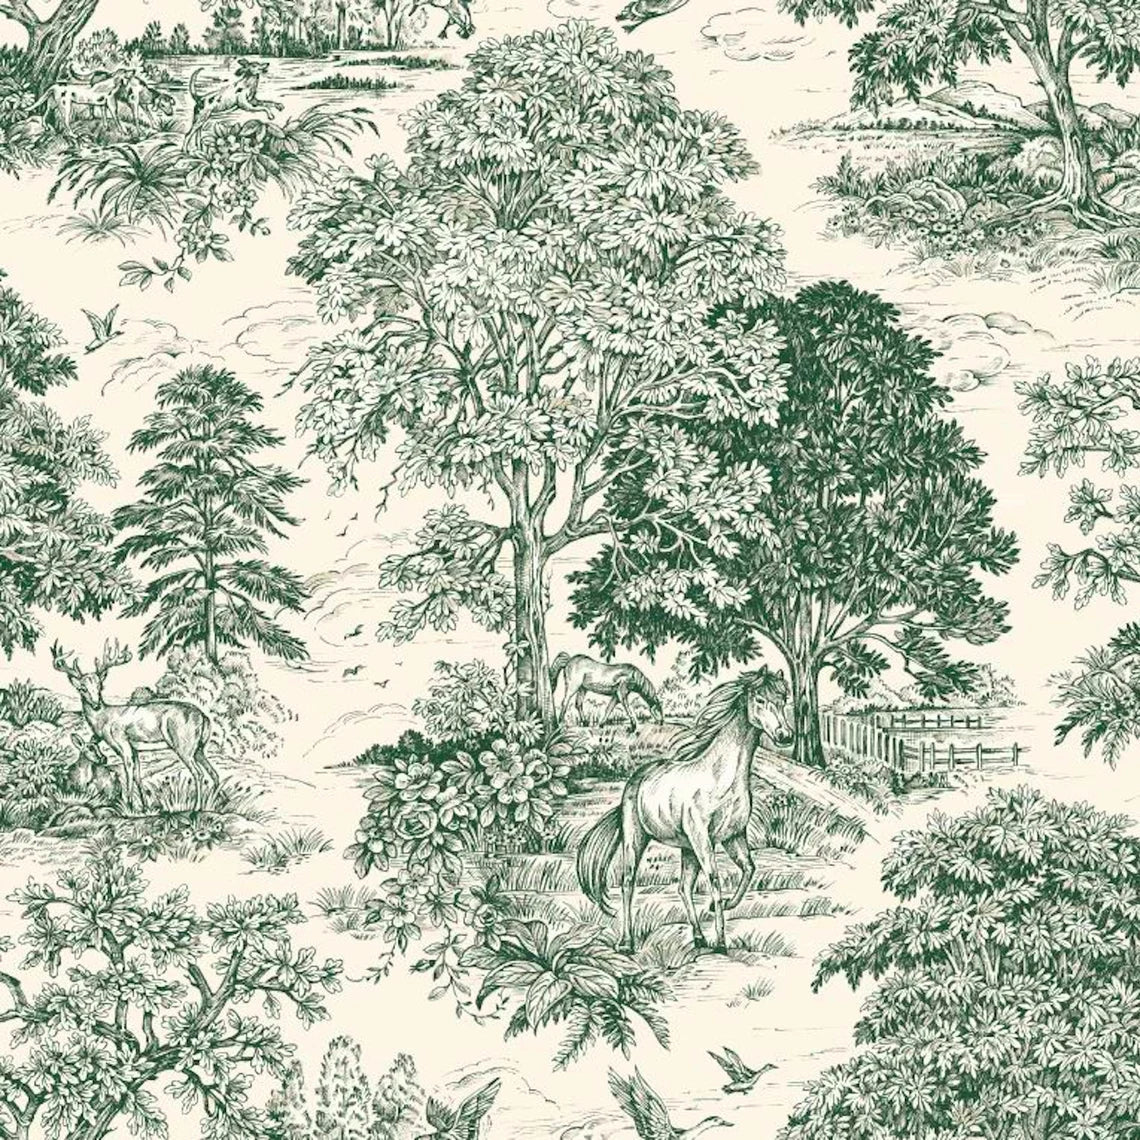 tailored crib skirt in Yellowstone Classic Green Country Toile- Horses, Deer, Dogs- Large Scale